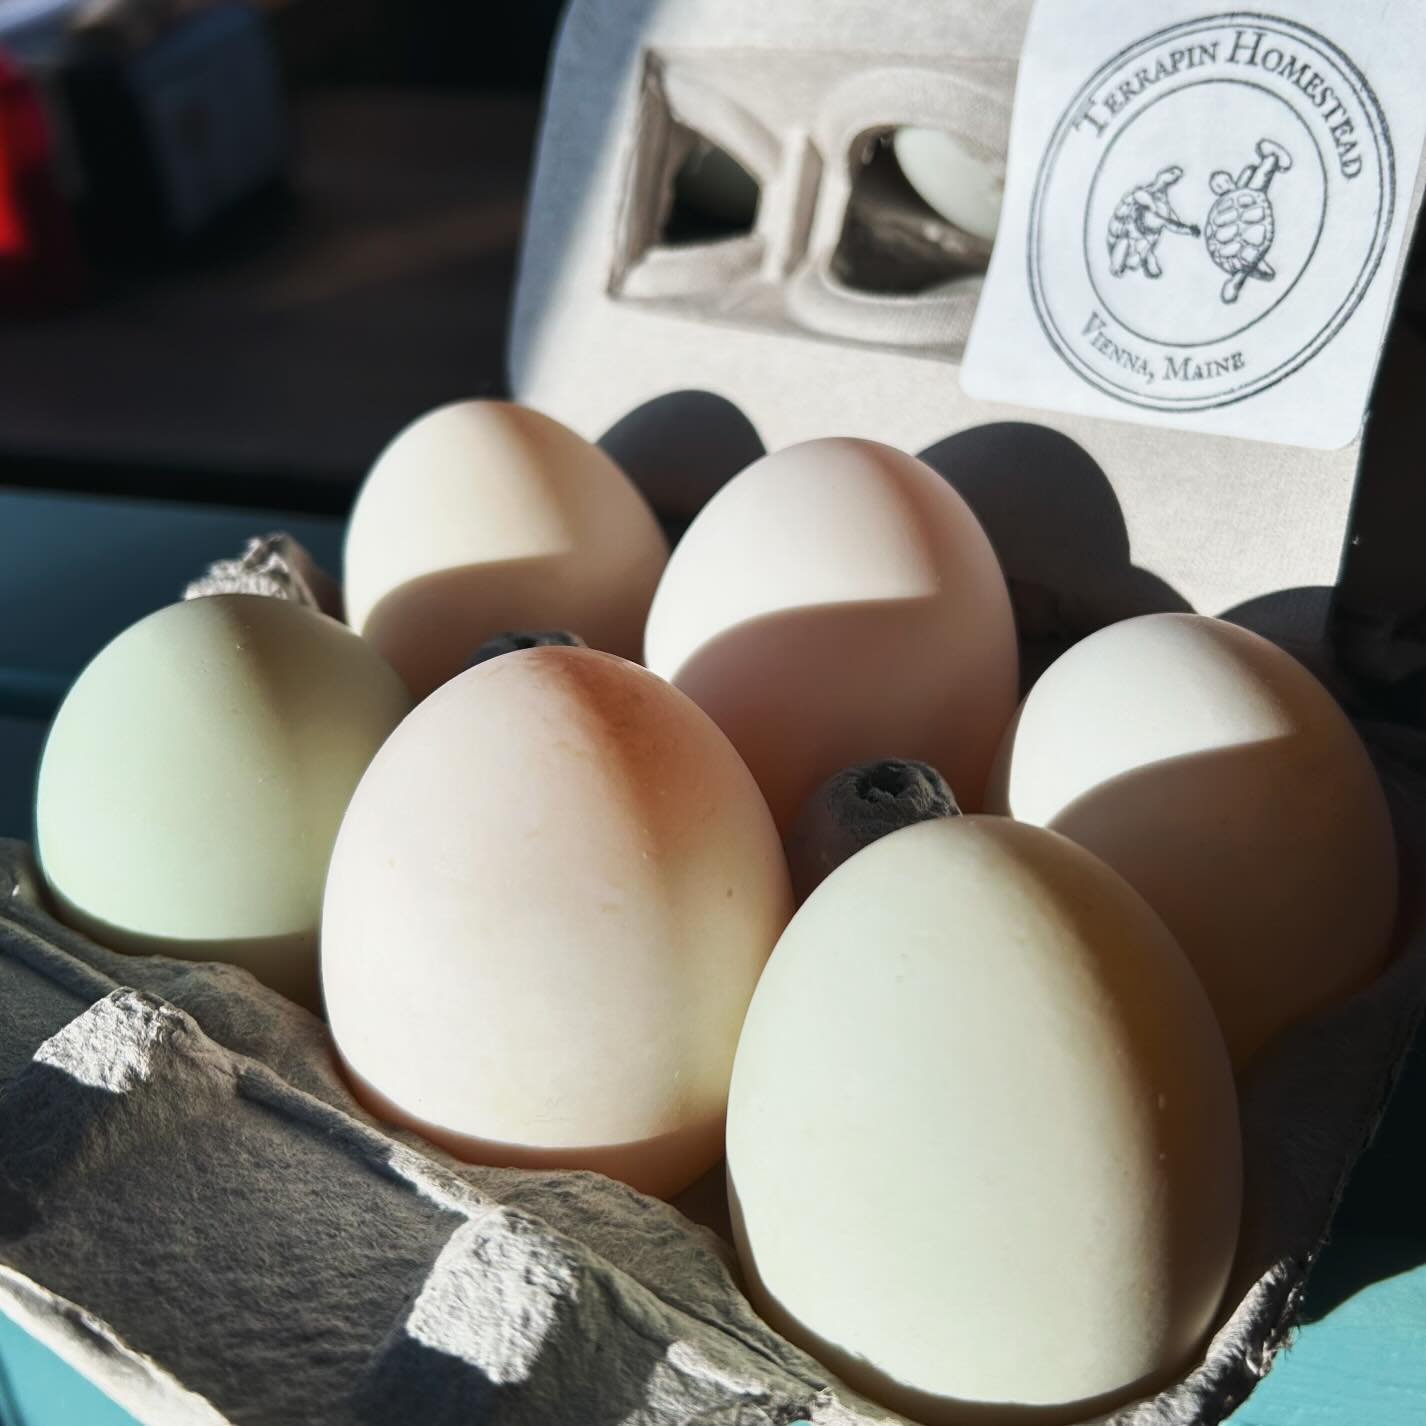 THURSDAY! Want to know what&rsquo;s quackening&rsquo; round here? We&rsquo;ve got fresh, local duck eggs from our friends at Terrapin Homestead in Vienna!
🦆🦆🦆